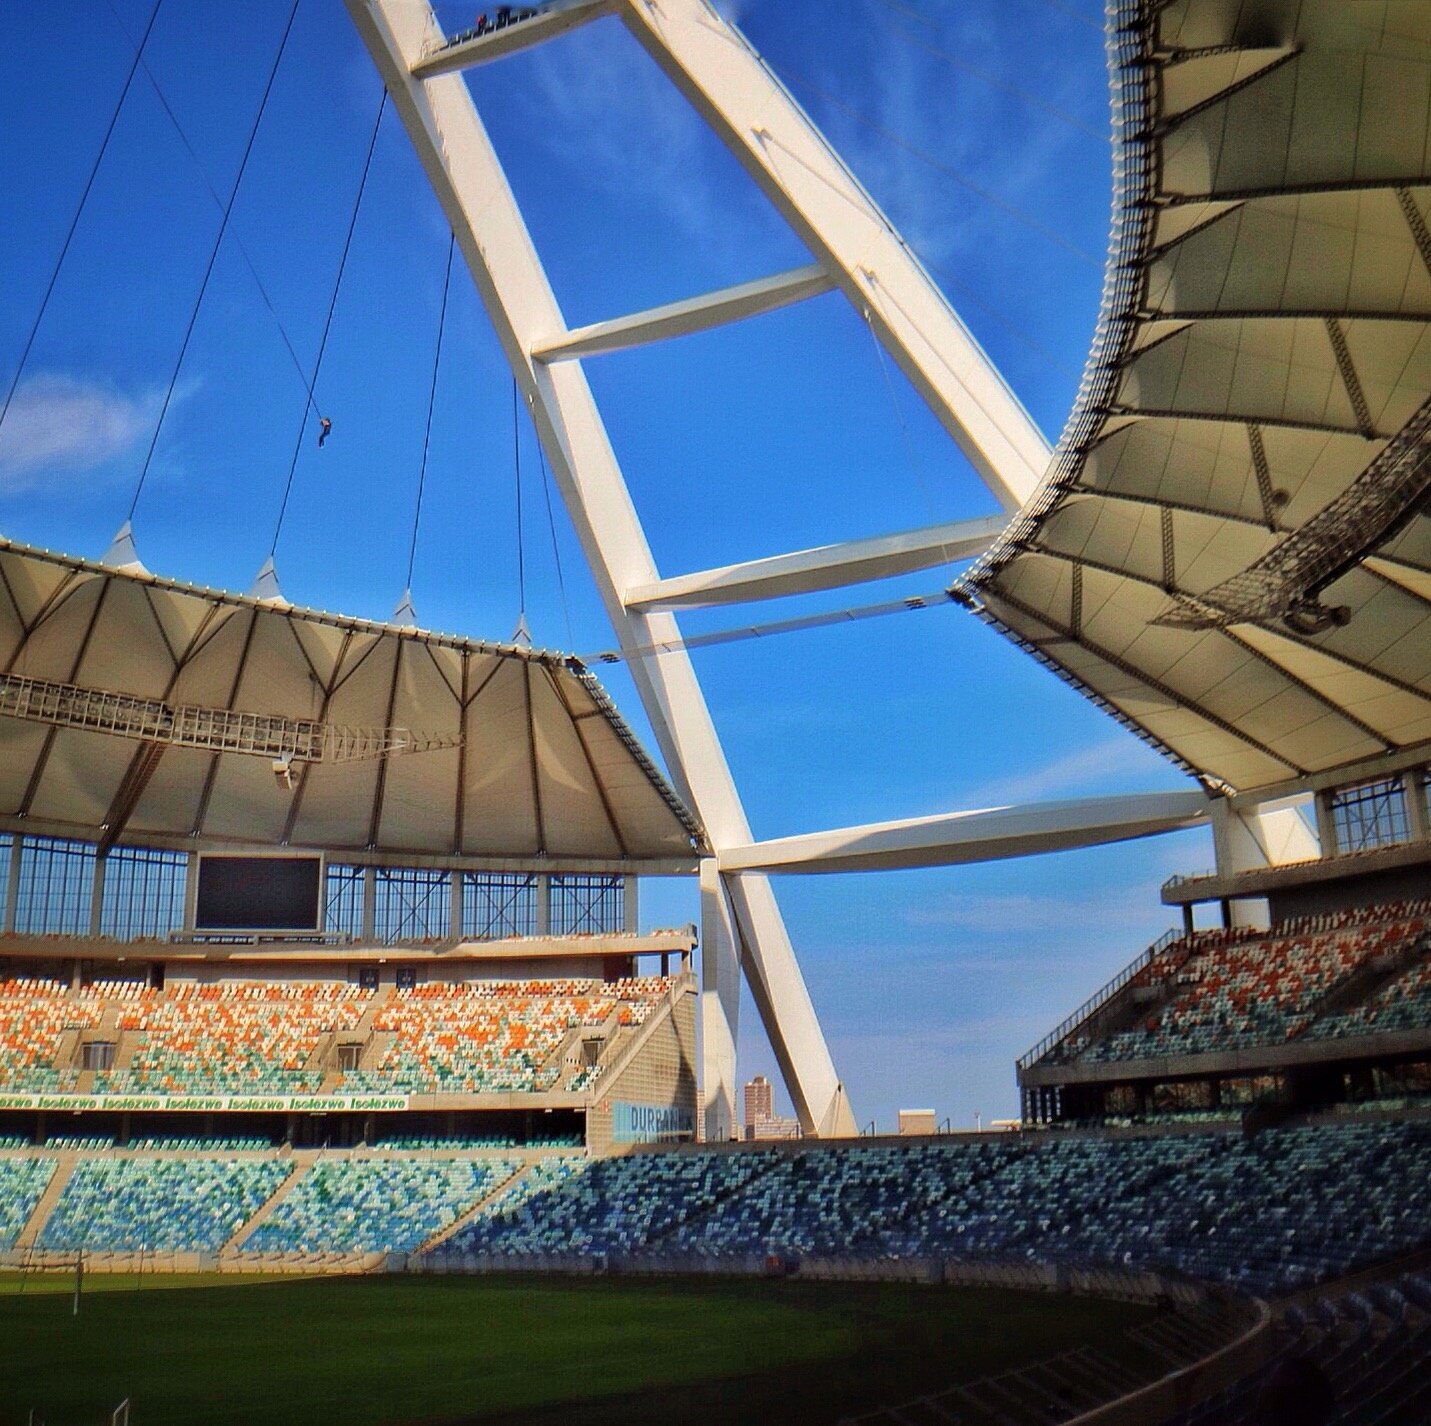 You can do a 100 meter rope swing off the top of the stadium in Durban, not for the faint of heart